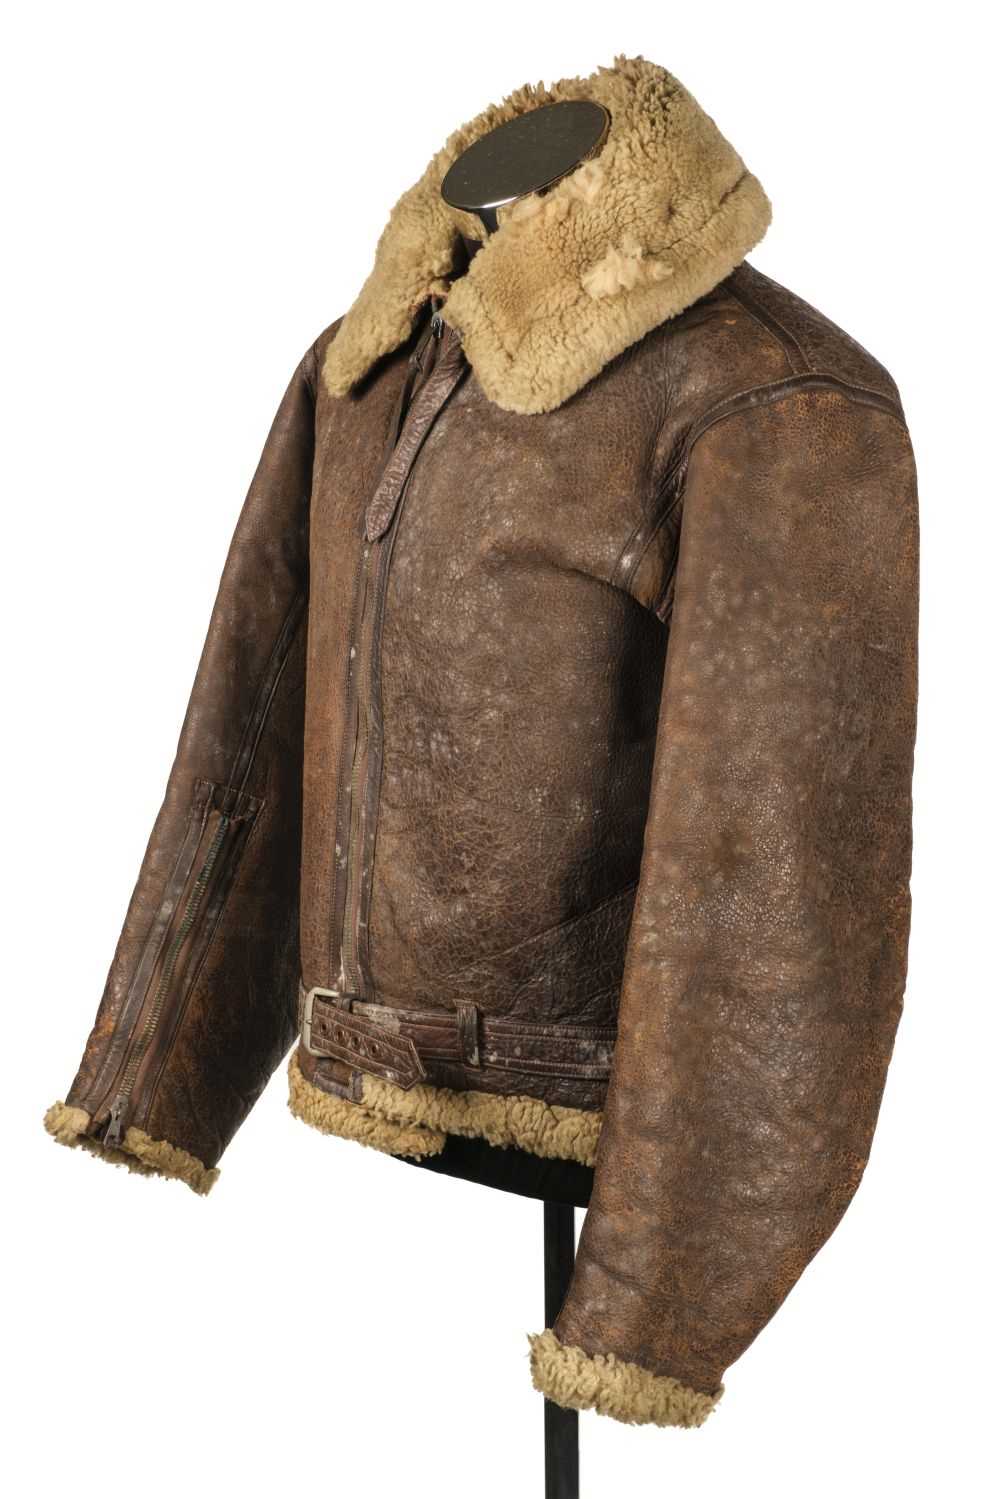 Lot 231 - Flying Jacket. A WWII RAF Irvin brown leather flying jacket (size 3) - Beardsall